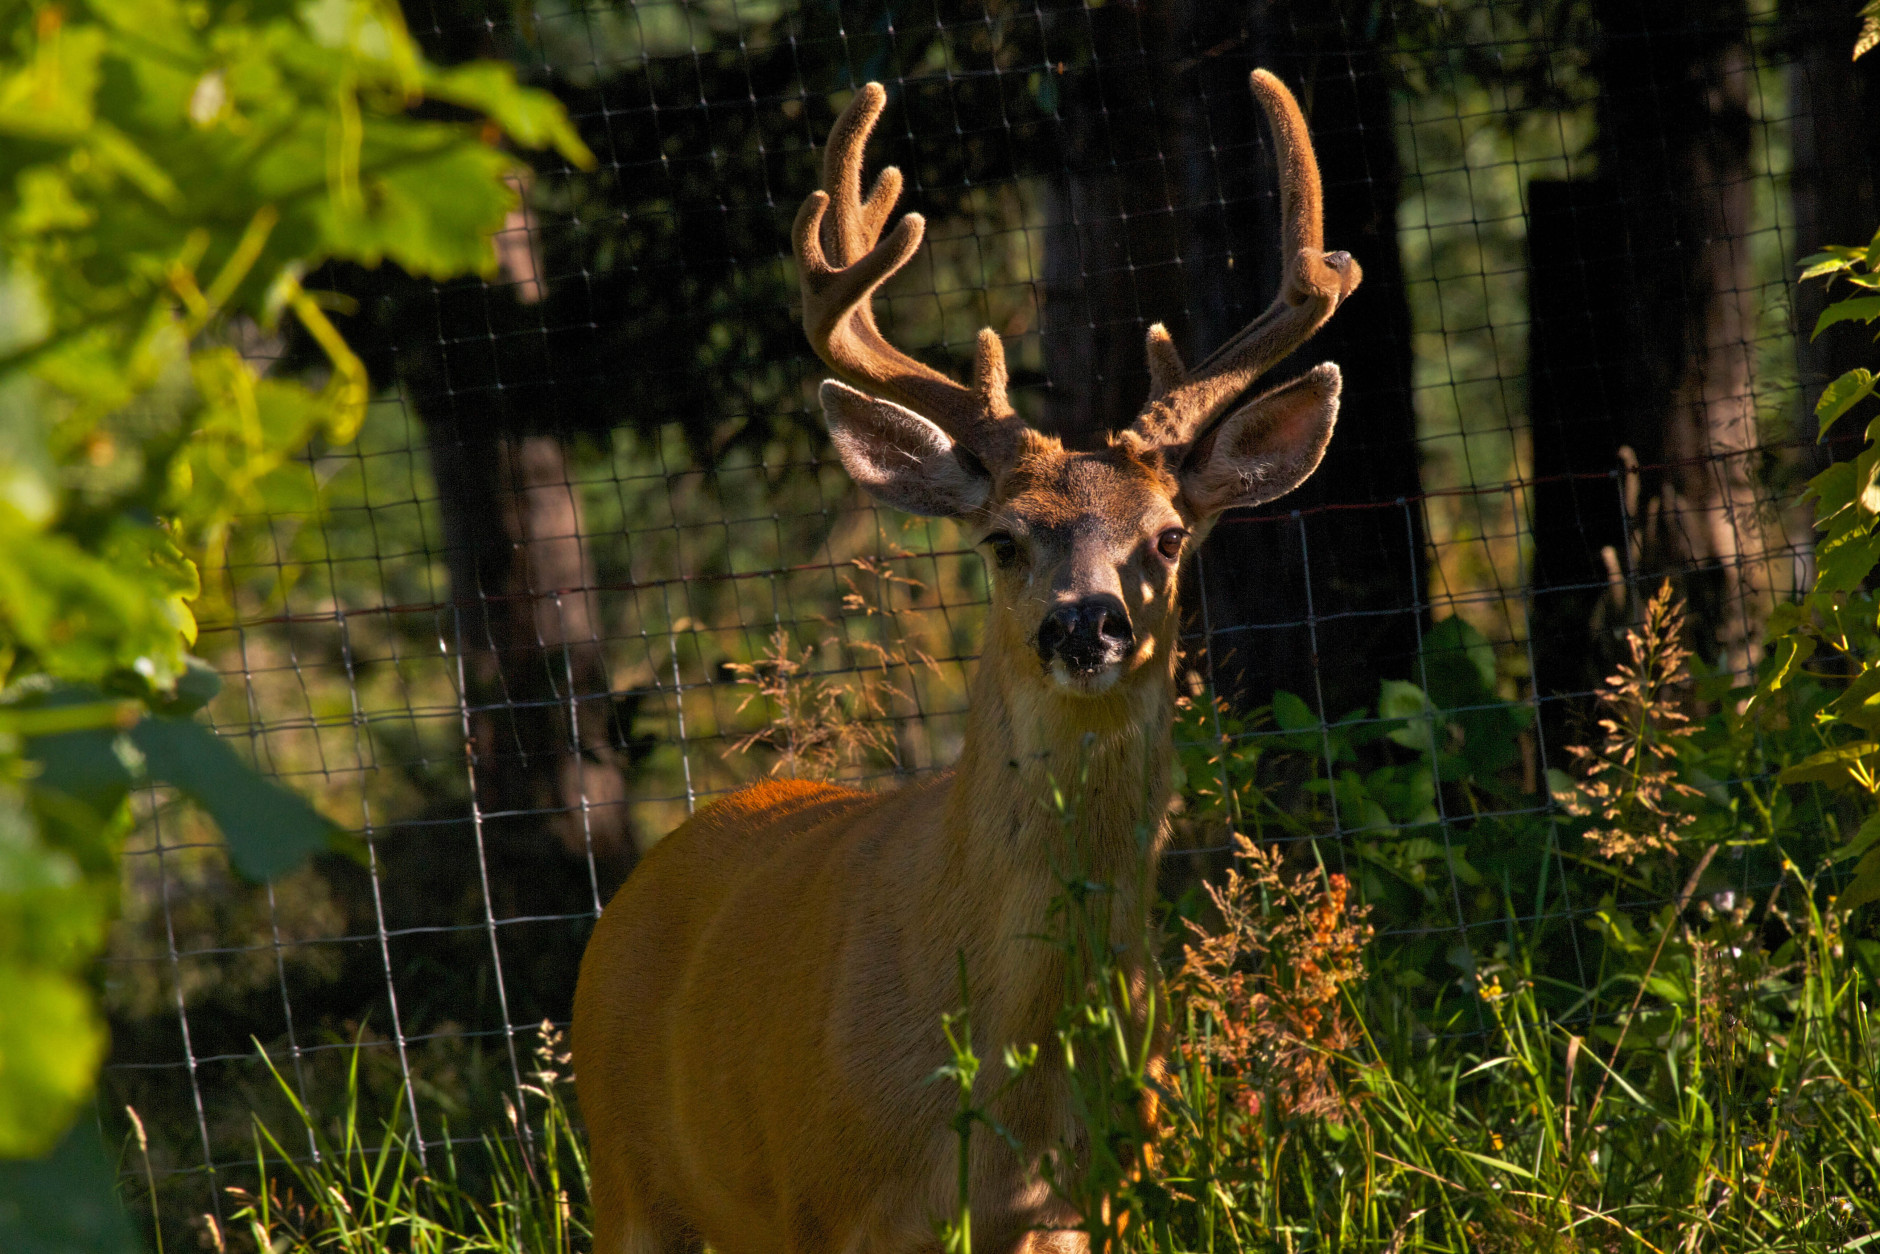 In this August 15, 2012 photo, a Blackmail buck looks up after feasting on grapevines in a backyard vineyard near Langley, Wash. The area is surrounded by an eight-foot-high fence but it was of little use that day because the property owner forgot to close one of the gates. Some of the most frequently asked questions from people new to gardening concern predators, like how to deal with foraging deer that have voracious appetites. (AP Photo/Dean Fosdick)